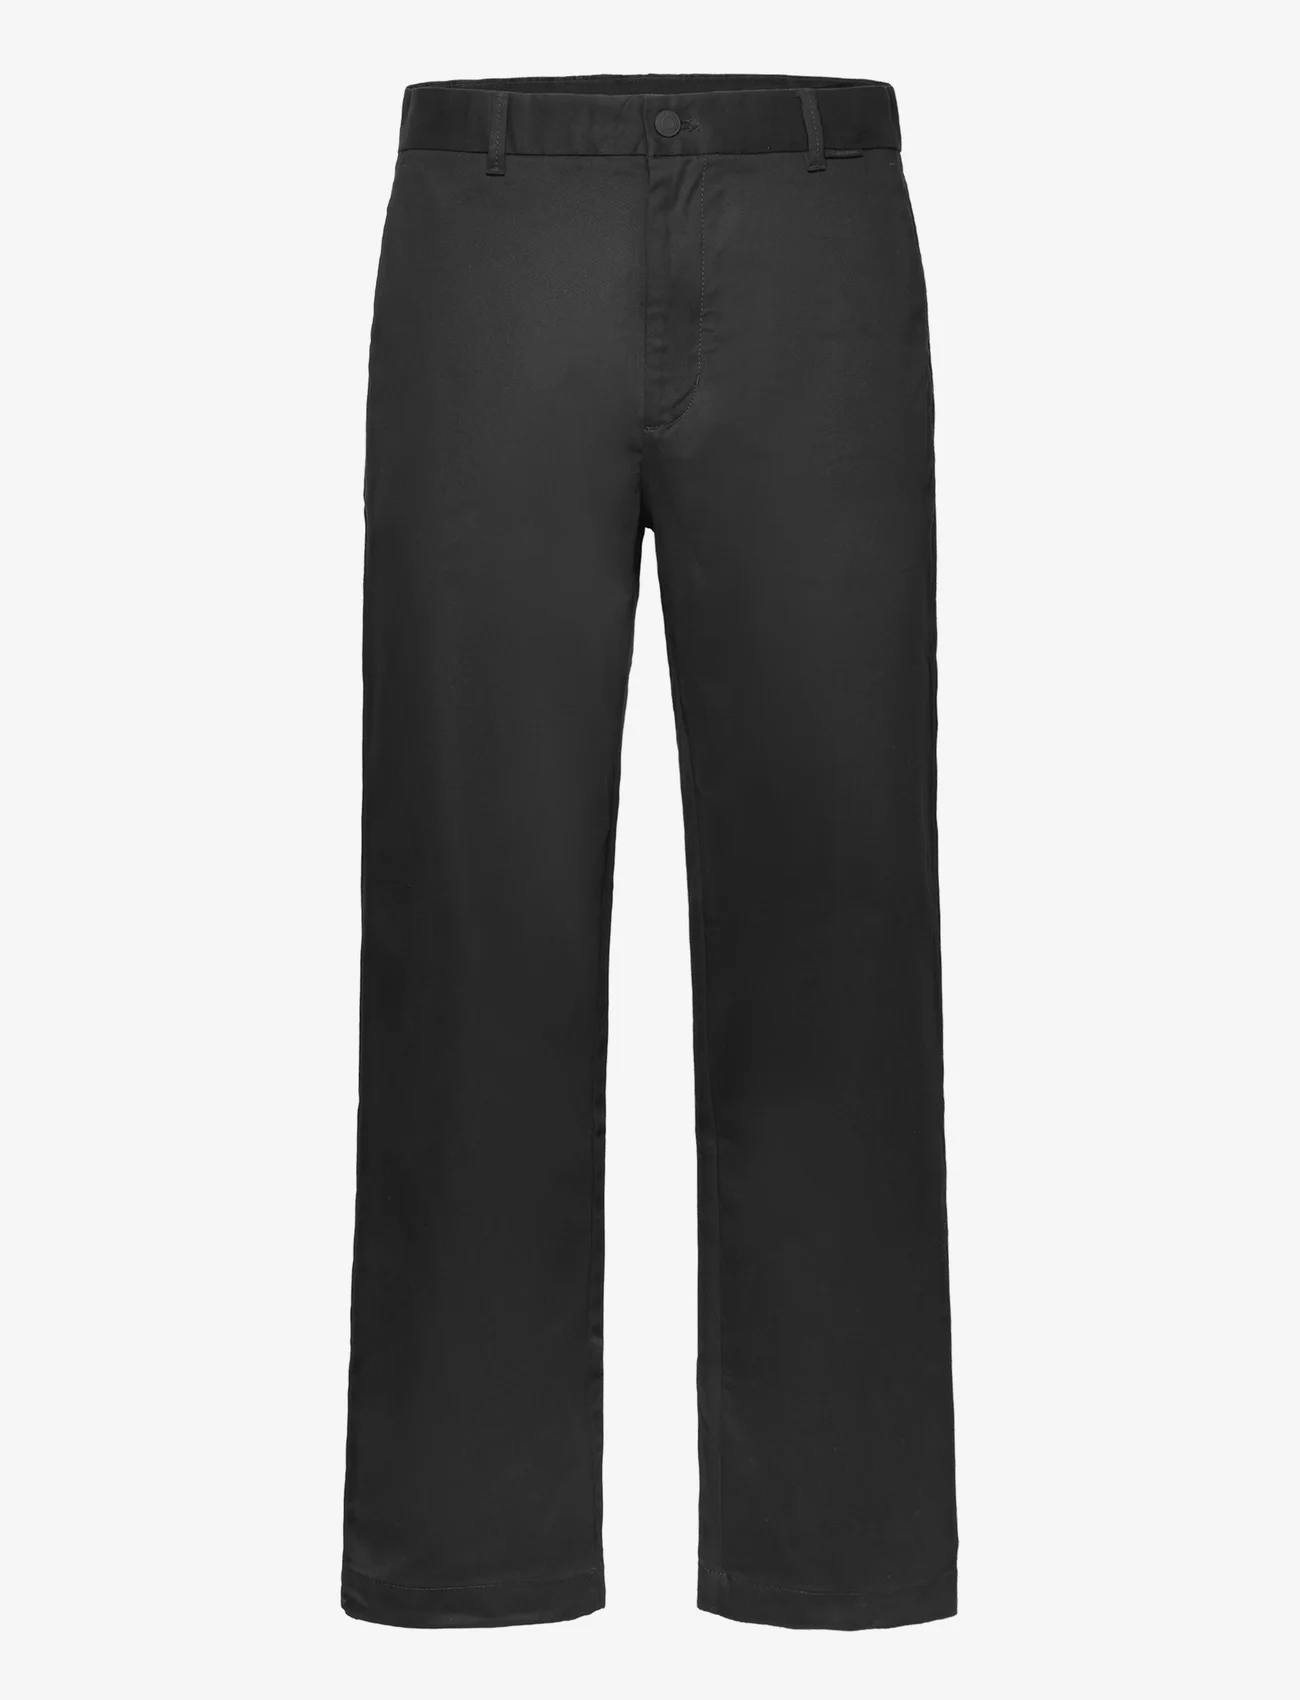 Calvin Klein - MODERN TWILL RELAXED PANTS - chino's - ck black - 0